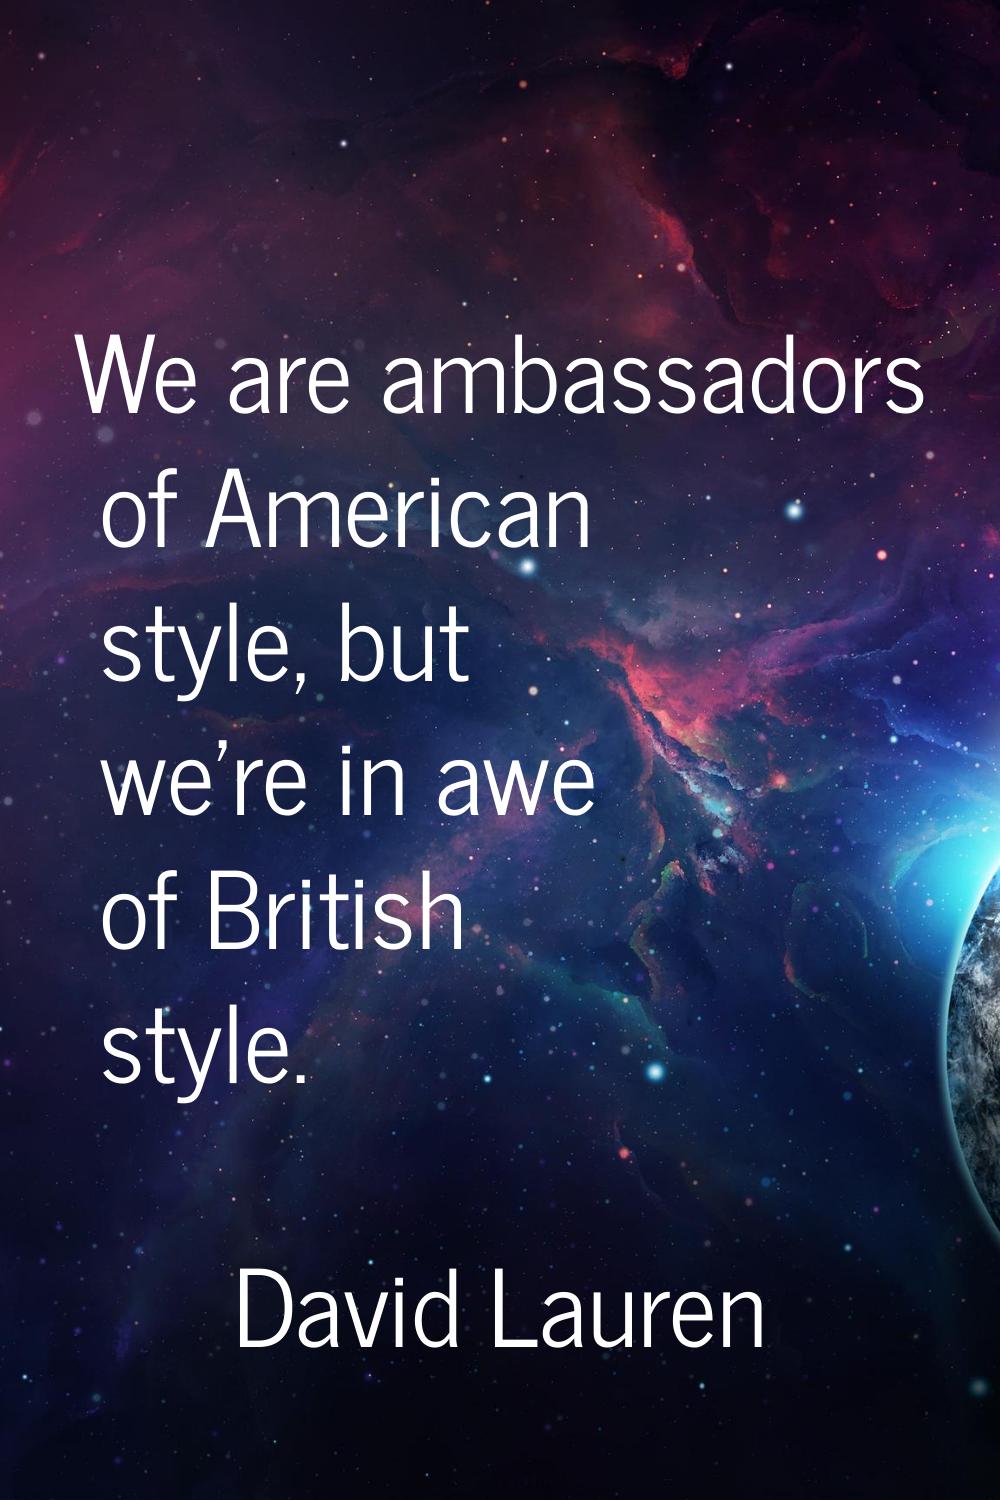 We are ambassadors of American style, but we're in awe of British style.